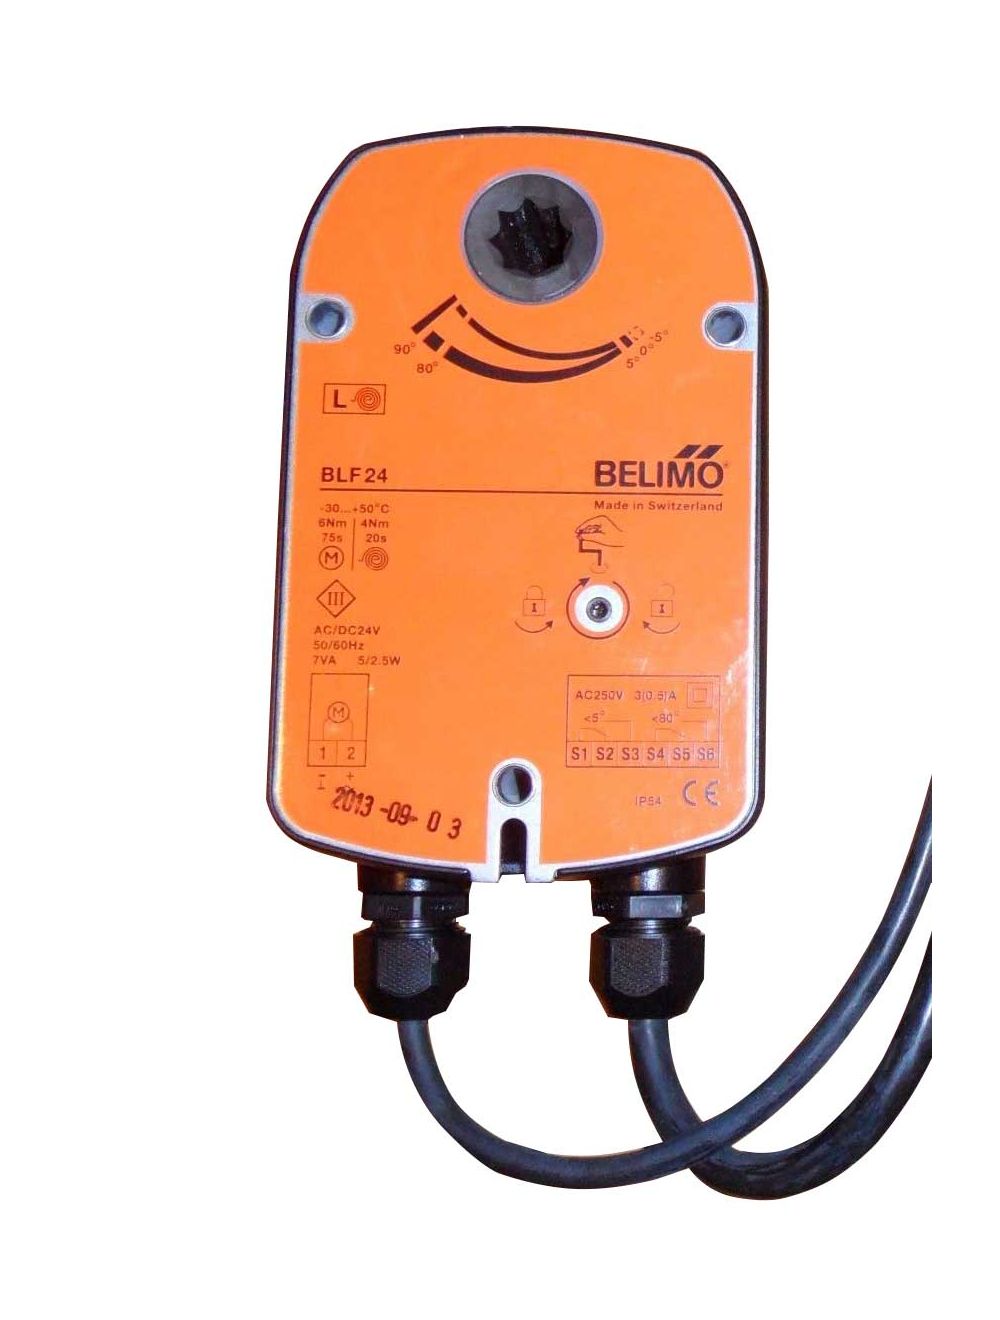 New In stock for sale, Belimo Actuator BLF24